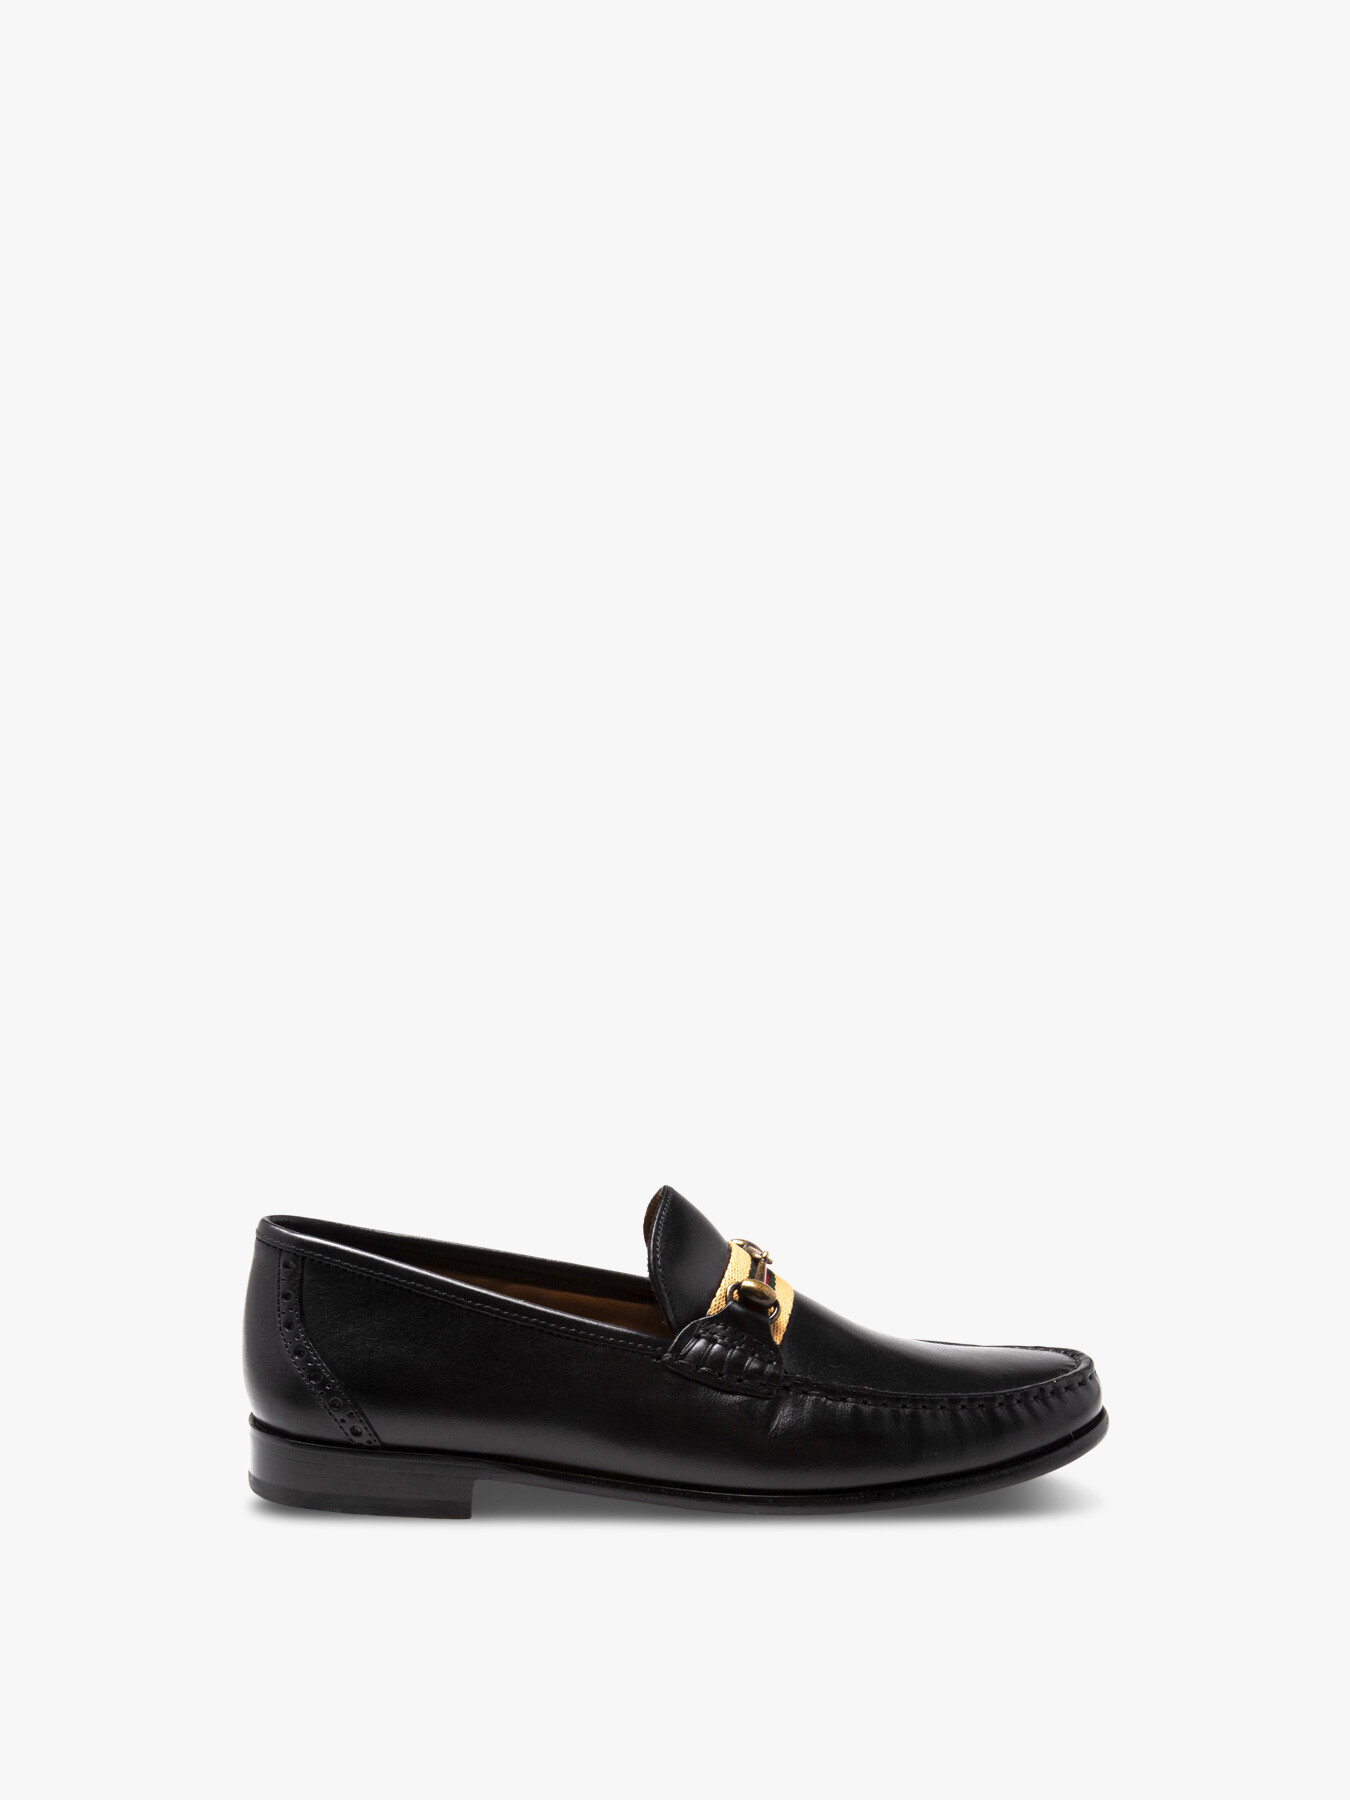 Sole Fritton Loafer Shoes Black